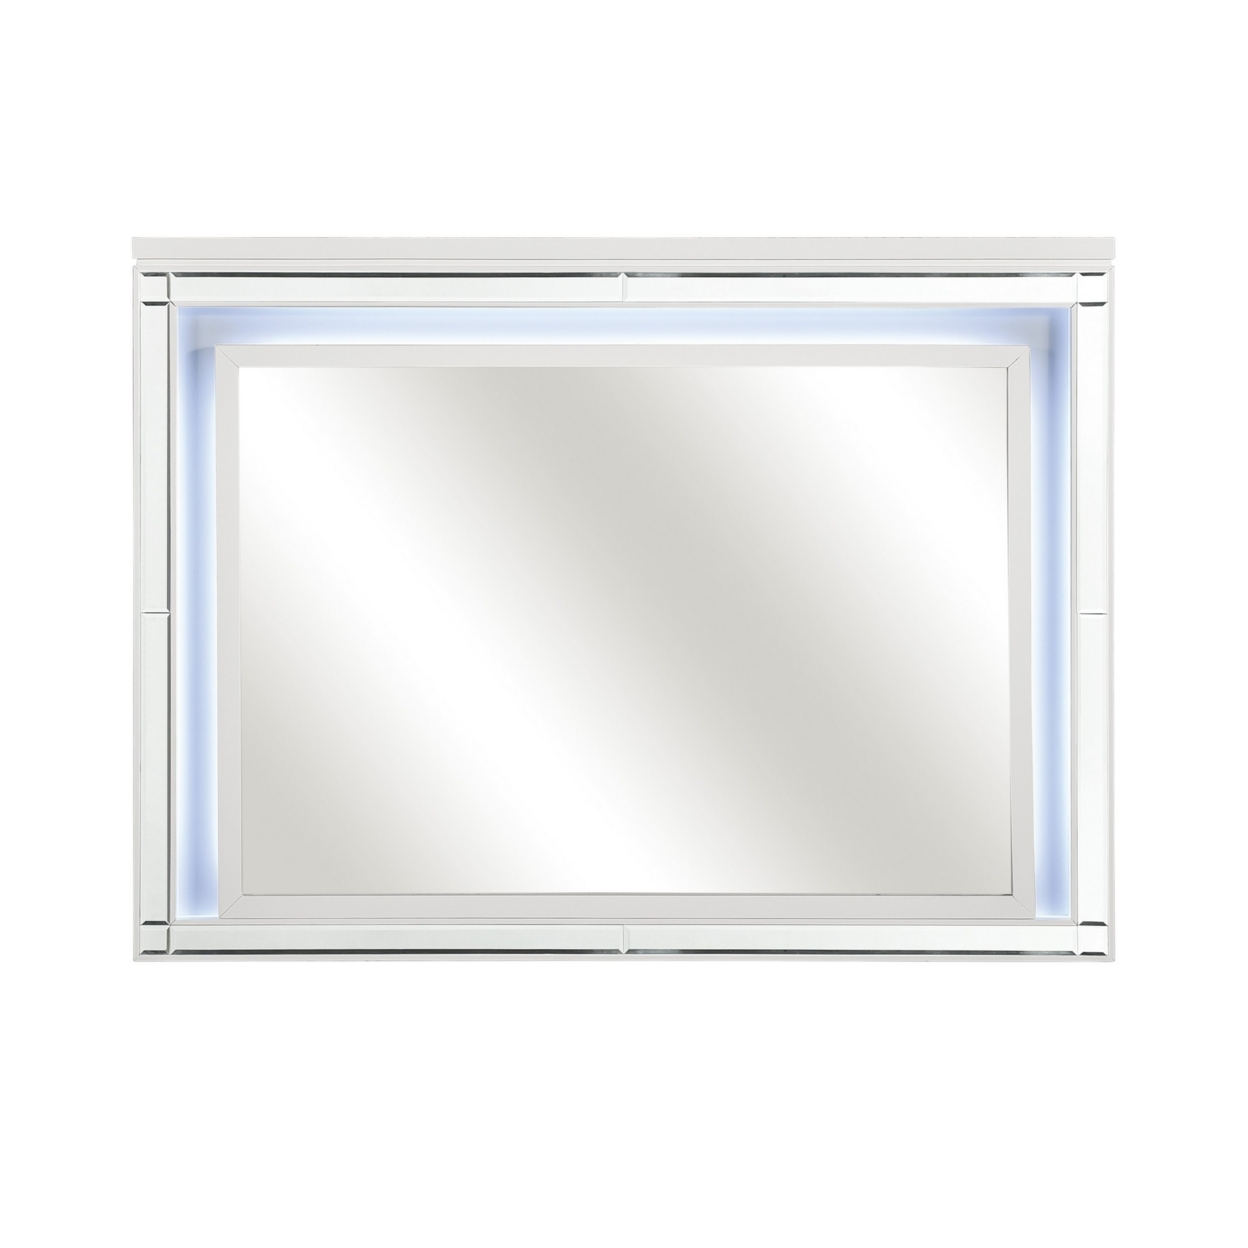 Contemporary Style Beveled Edge Mirror With LED Light, White And Silver- Saltoro Sherpi